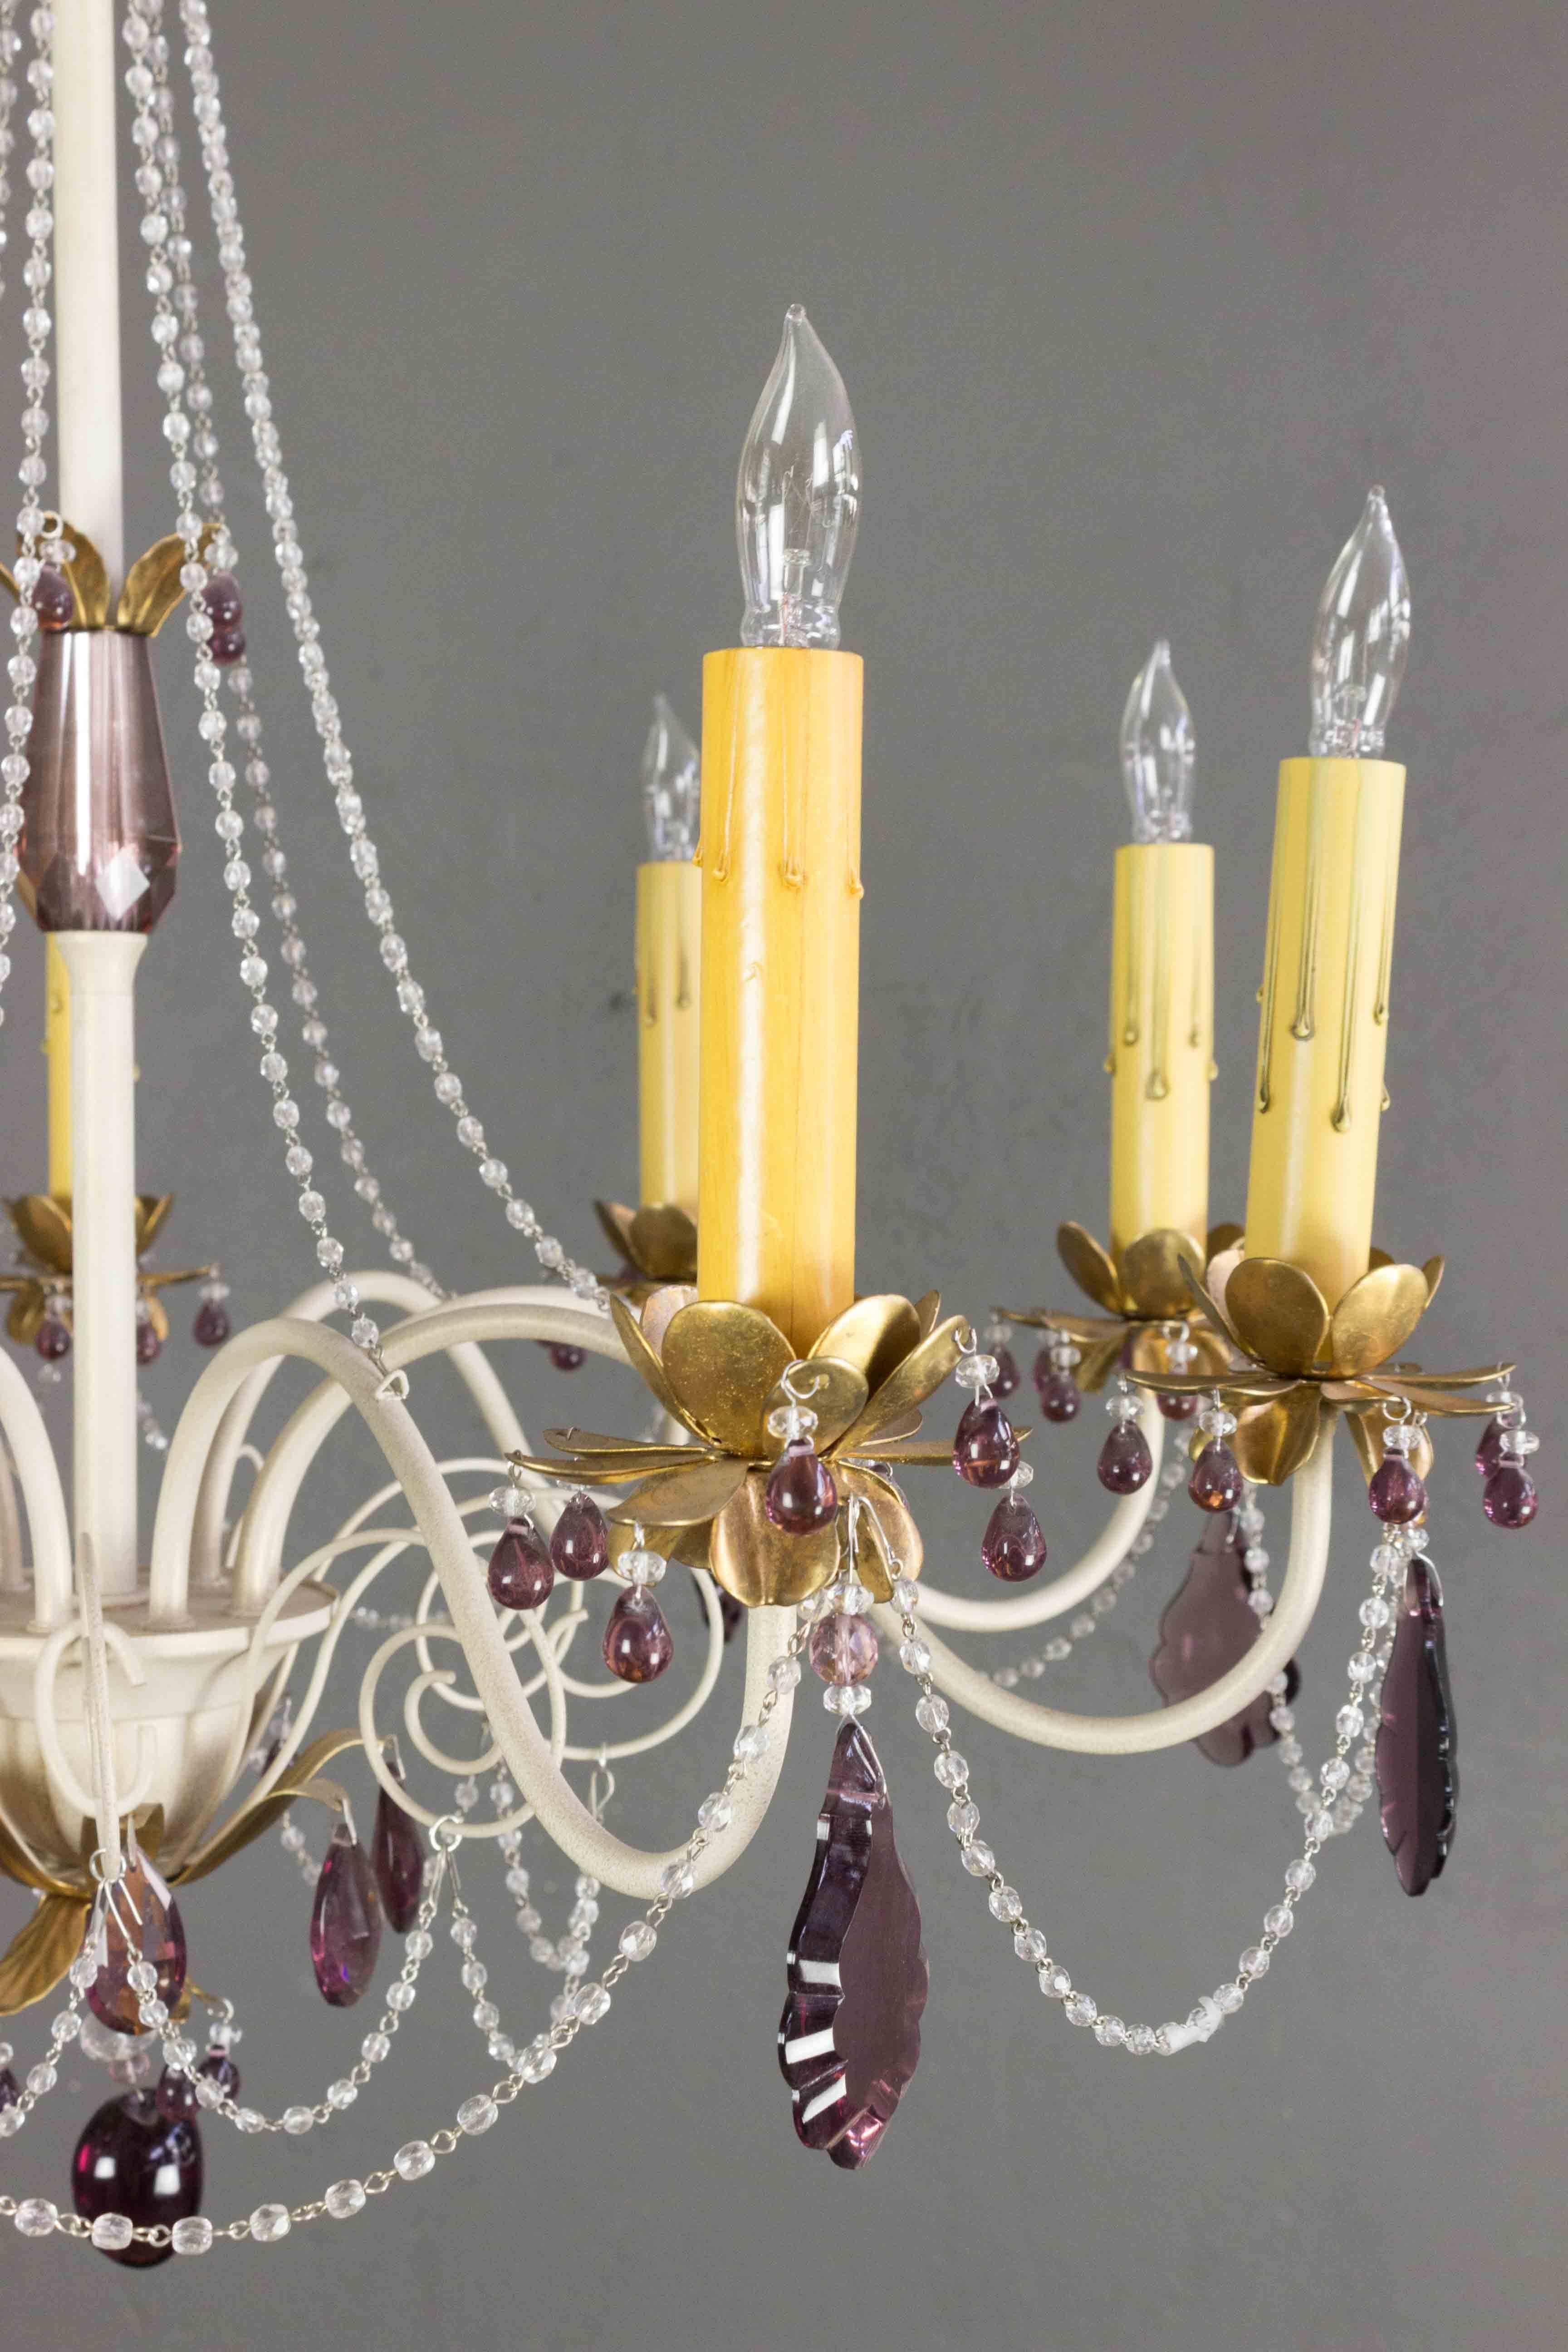 Presenting a stunning French 1960s painted white metal chandelier with nine arms and beautiful amethyst colored glass decorations. Complete with a matching canopy and chain, this chandelier has been wired according to UL standards, ensuring ease of